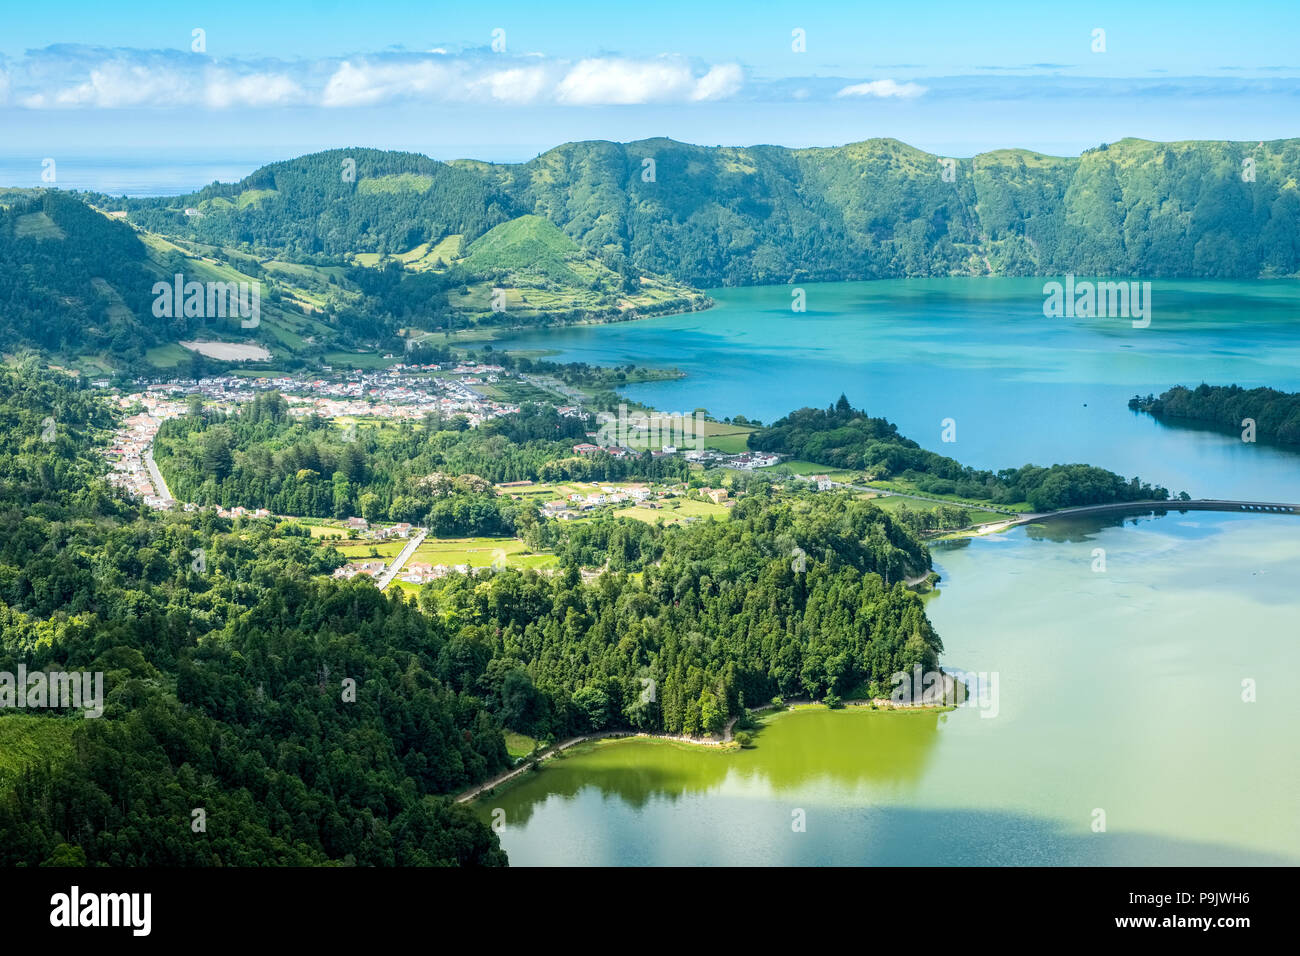 Sete Cidades, two lakes and a village in the dormant crater of a volcano on the island of Sao Miguel, The Azores Stock Photo